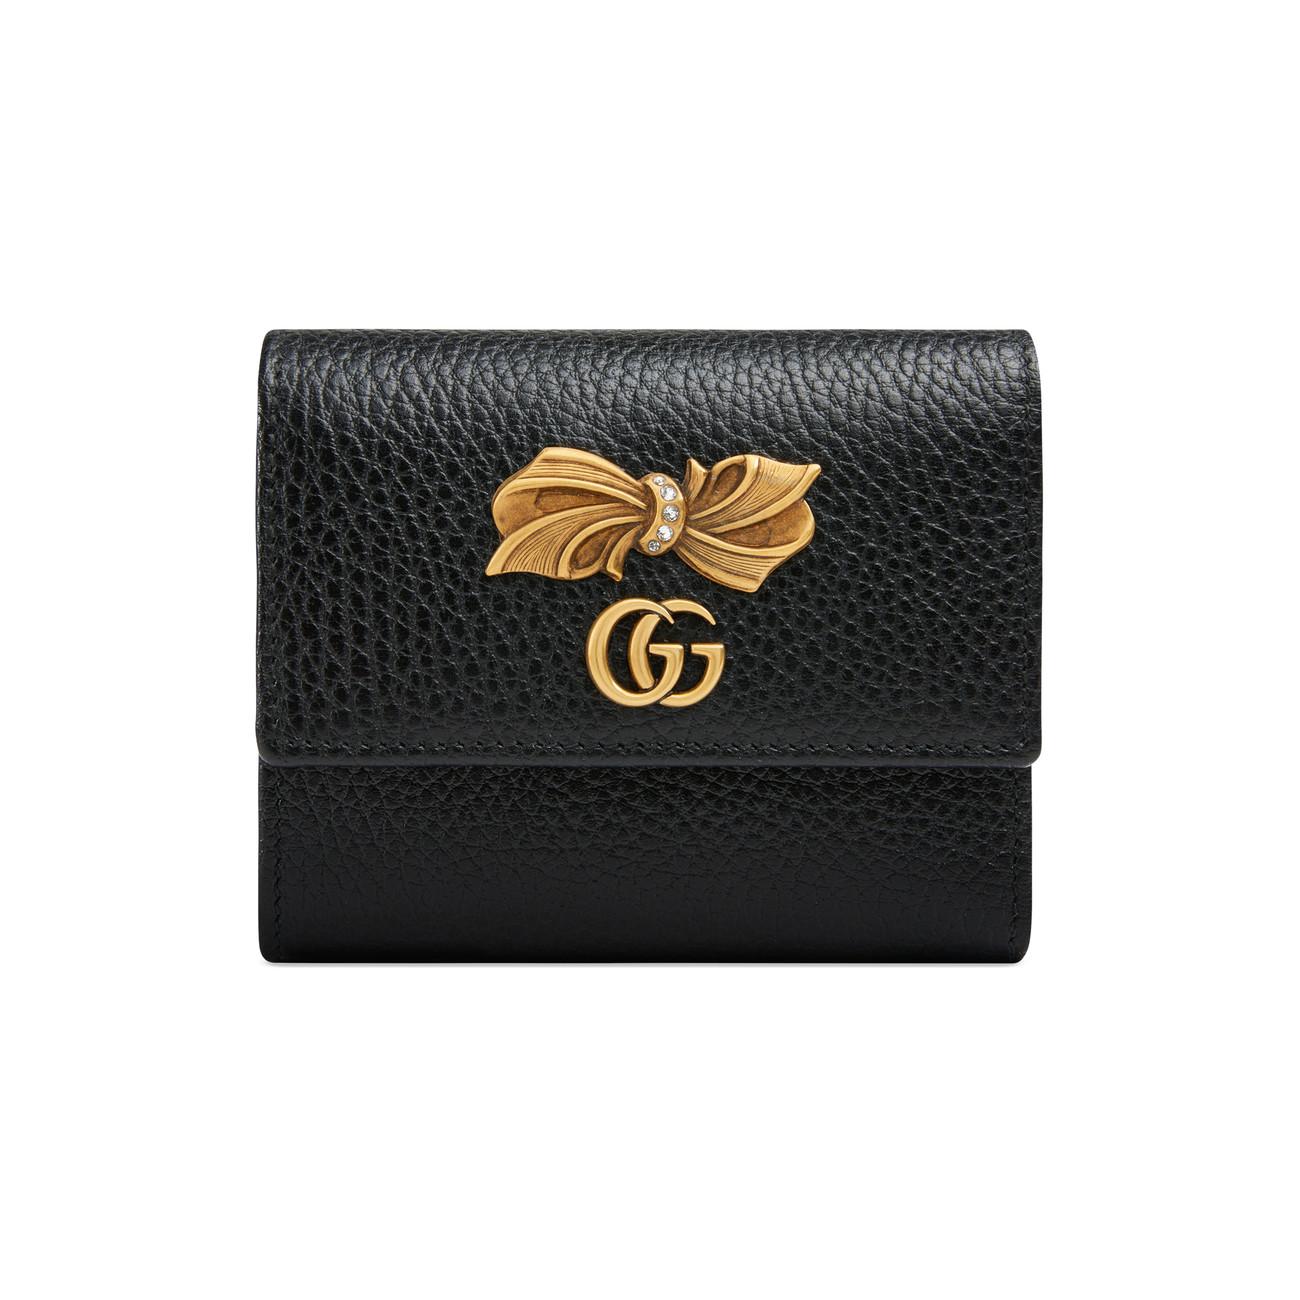 briefpapier Soeverein ik heb dorst Gucci Leather Wallet With Bow in Black | Lyst